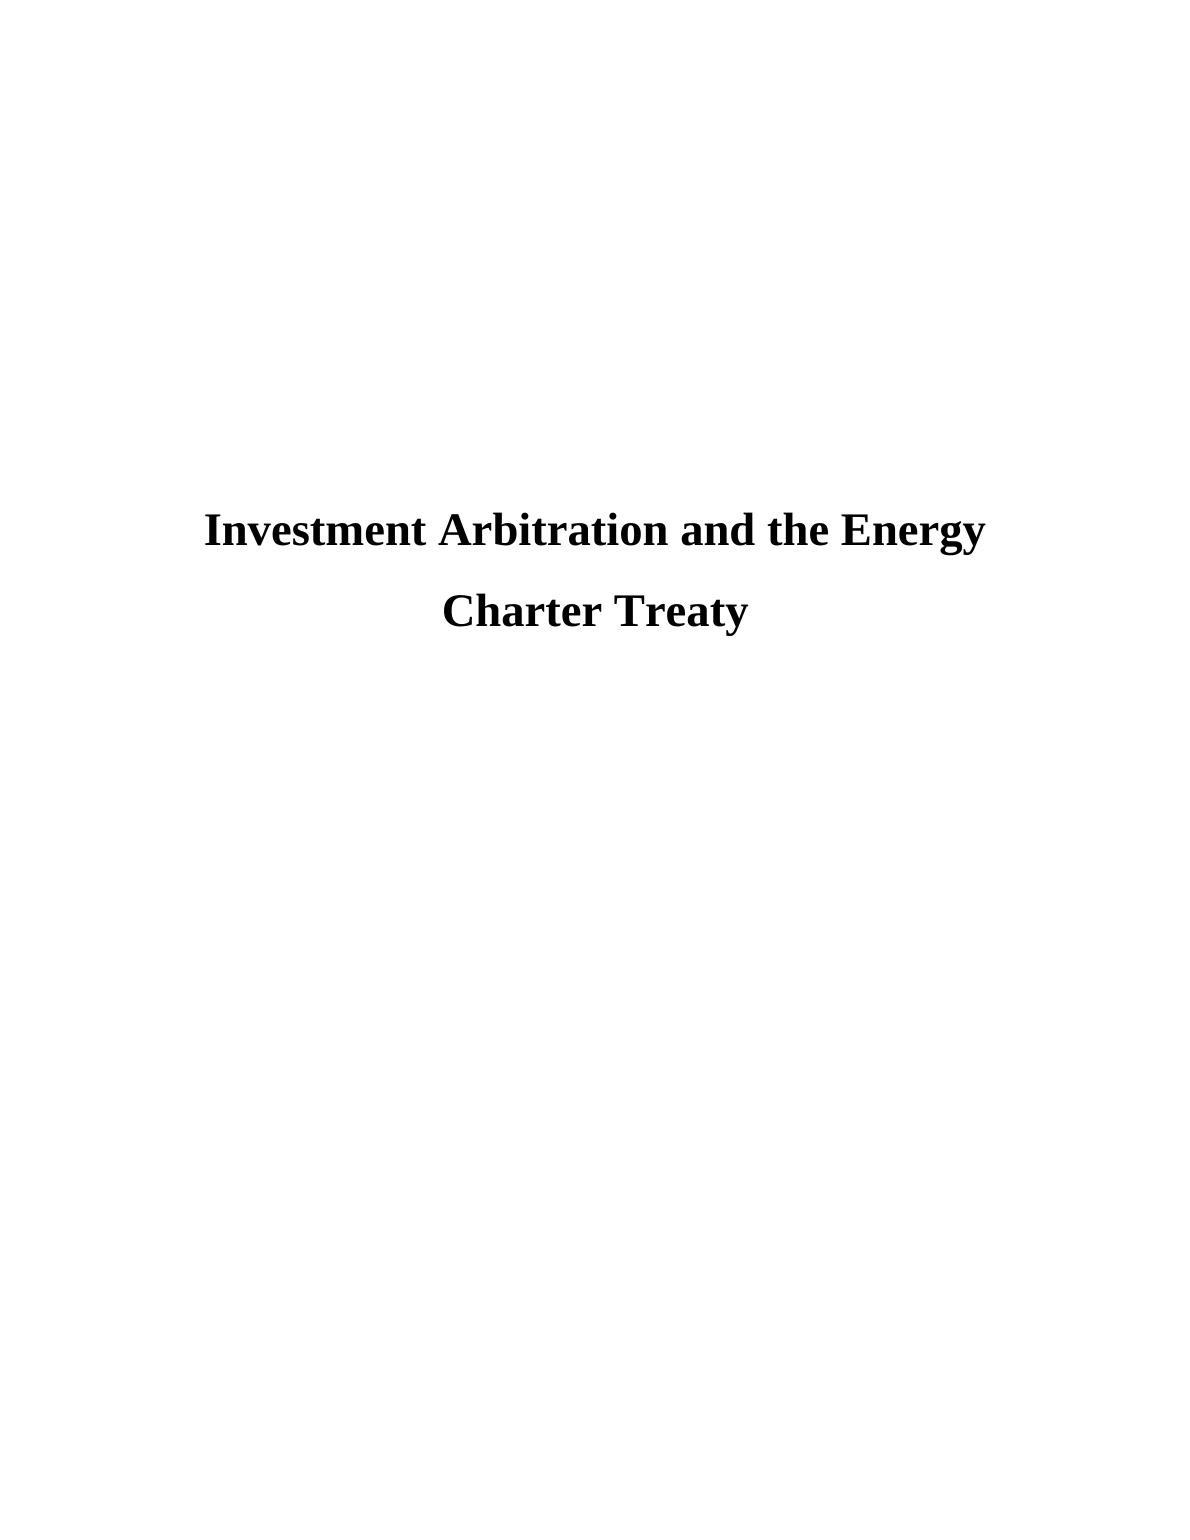 Report on Energy Charter Treaty (ECT) and Investment Arbitration_1